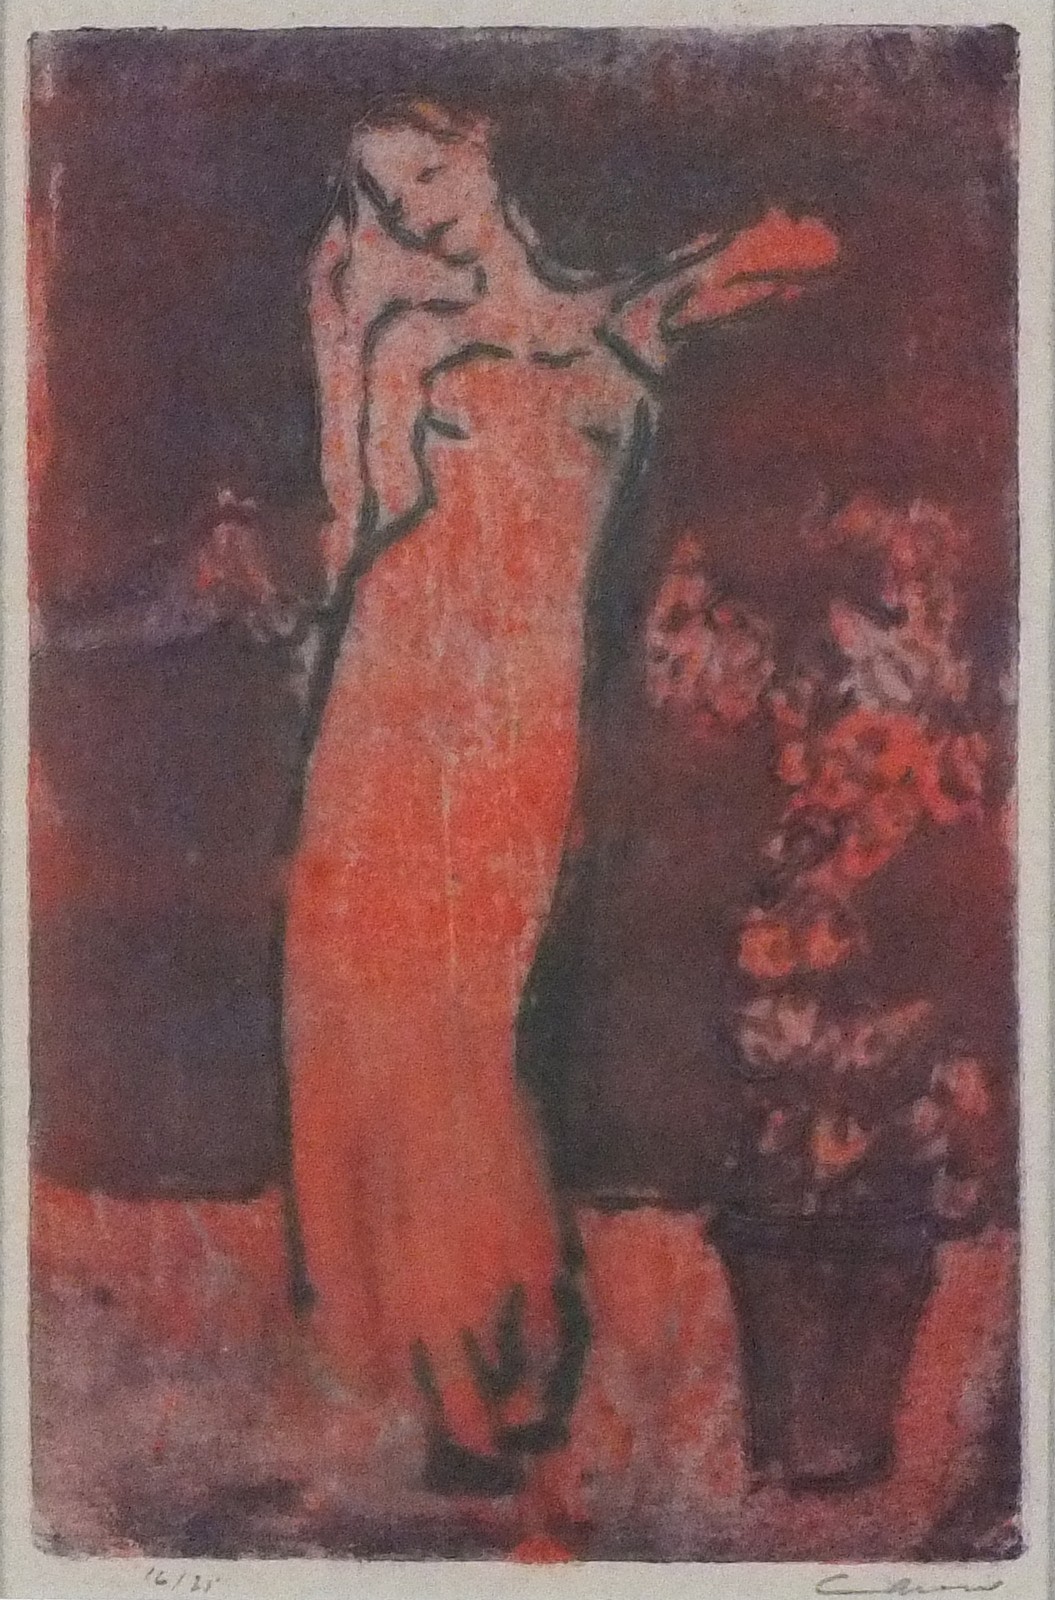 Ian LAURIE (British b. 1933) Party Girl, Etching, Signed lower right, numbered 16/25, titled